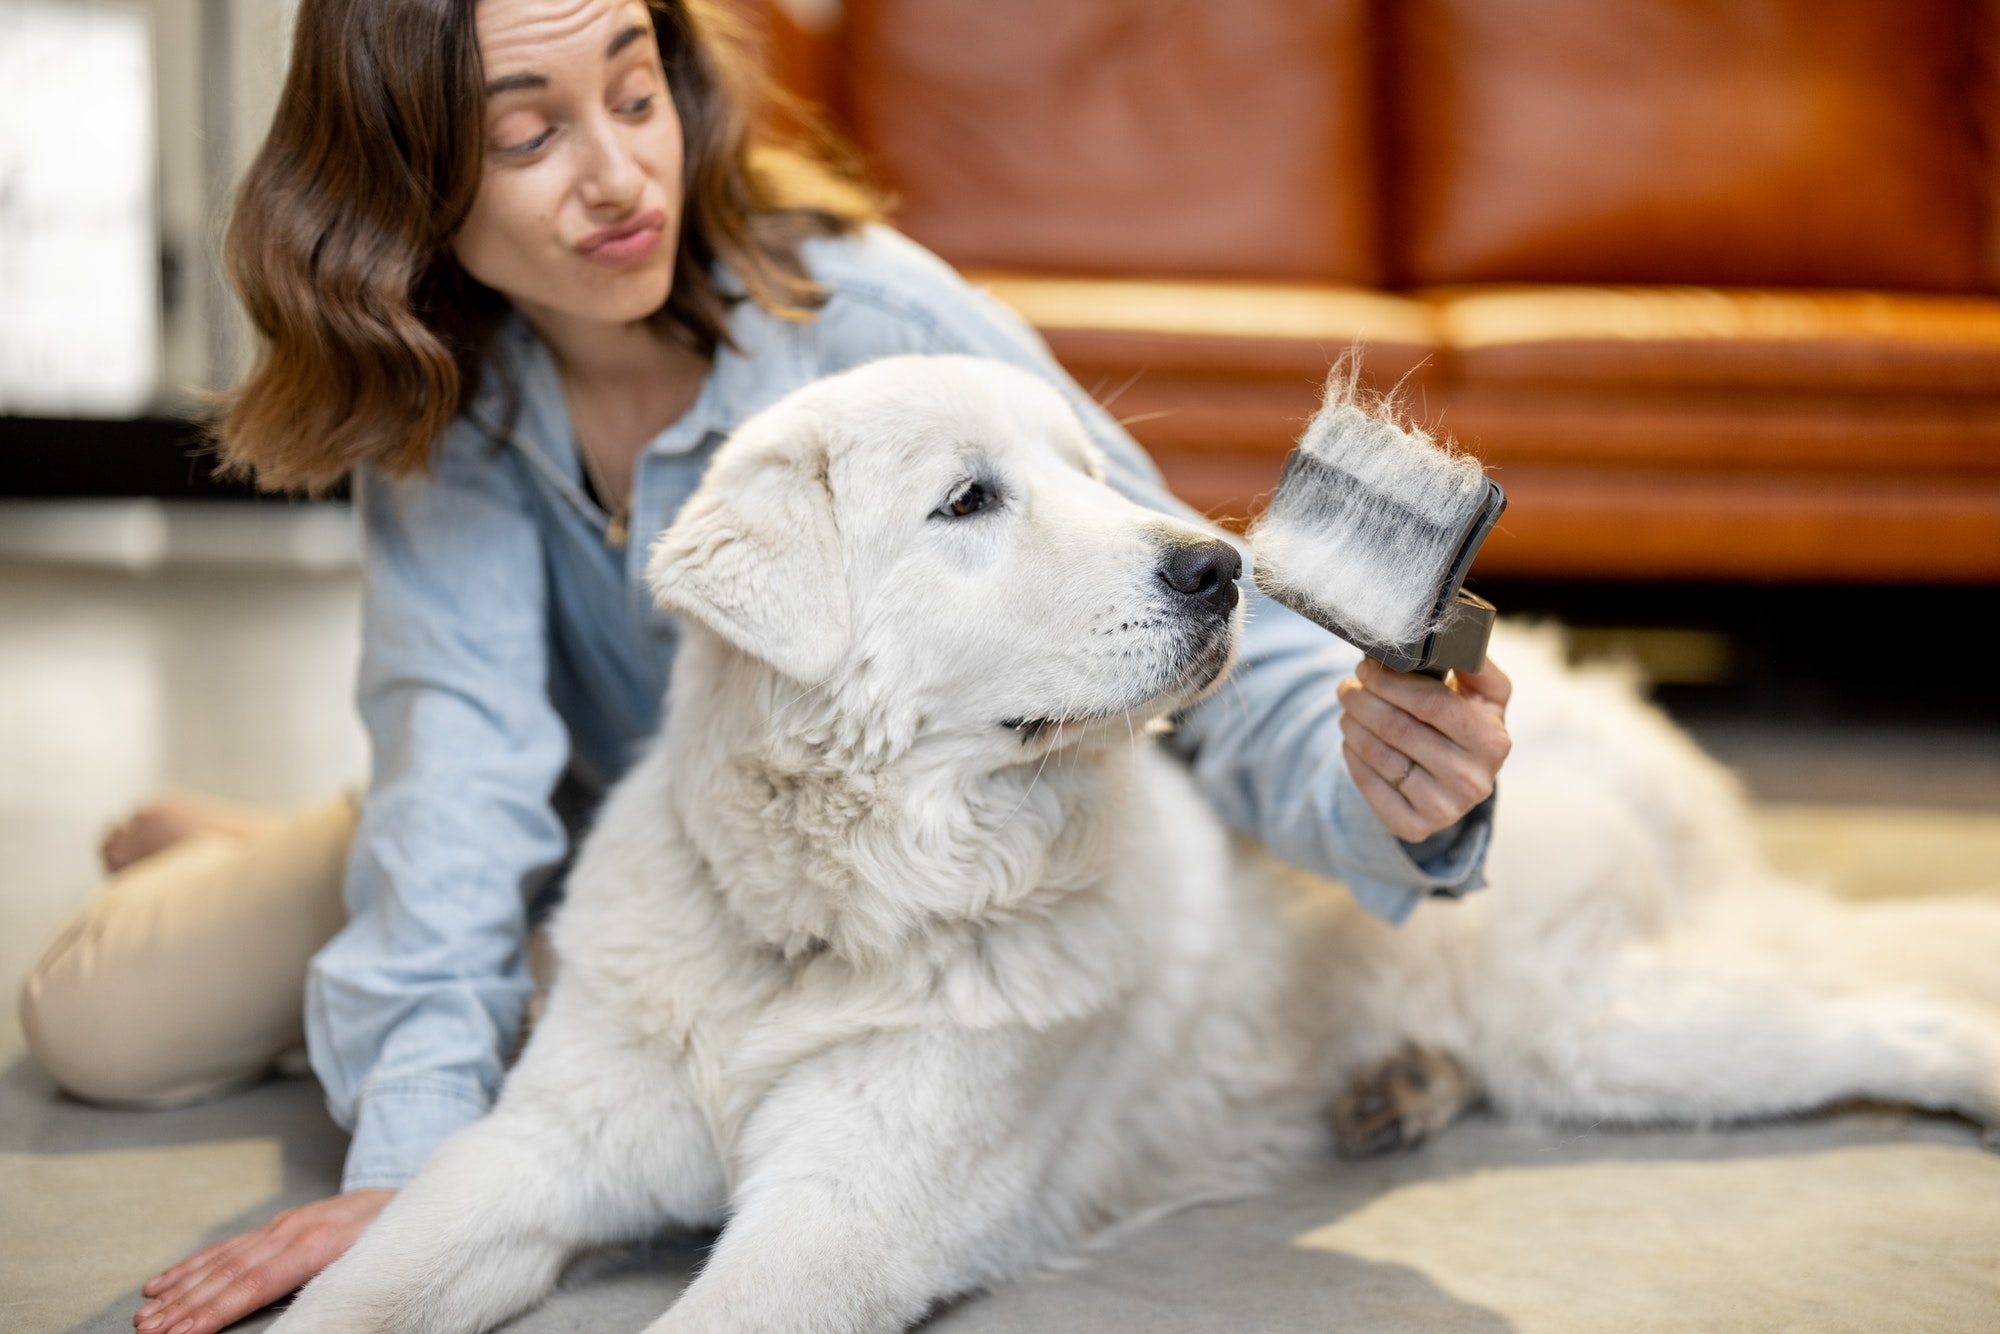 Woman combs the dog's hair with a brush